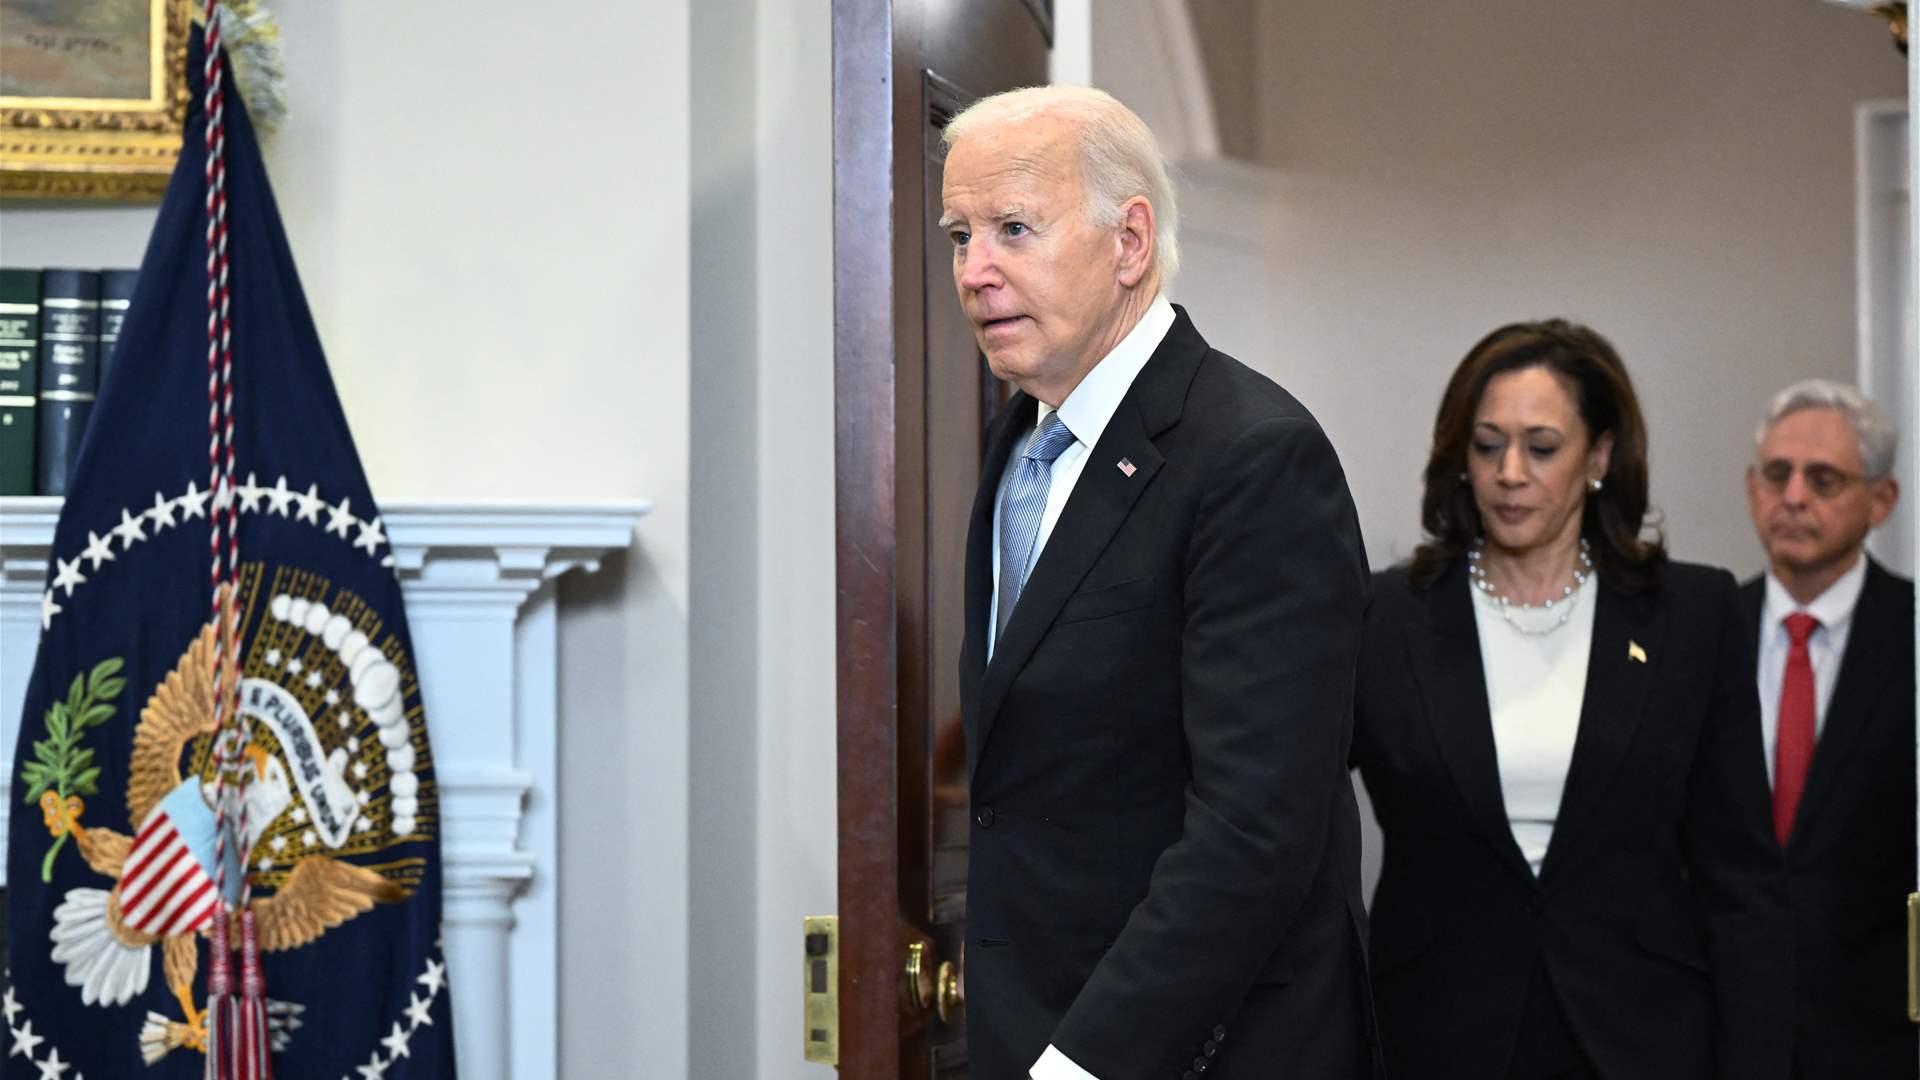 US President Biden tests positive for Covid, fueling health worries